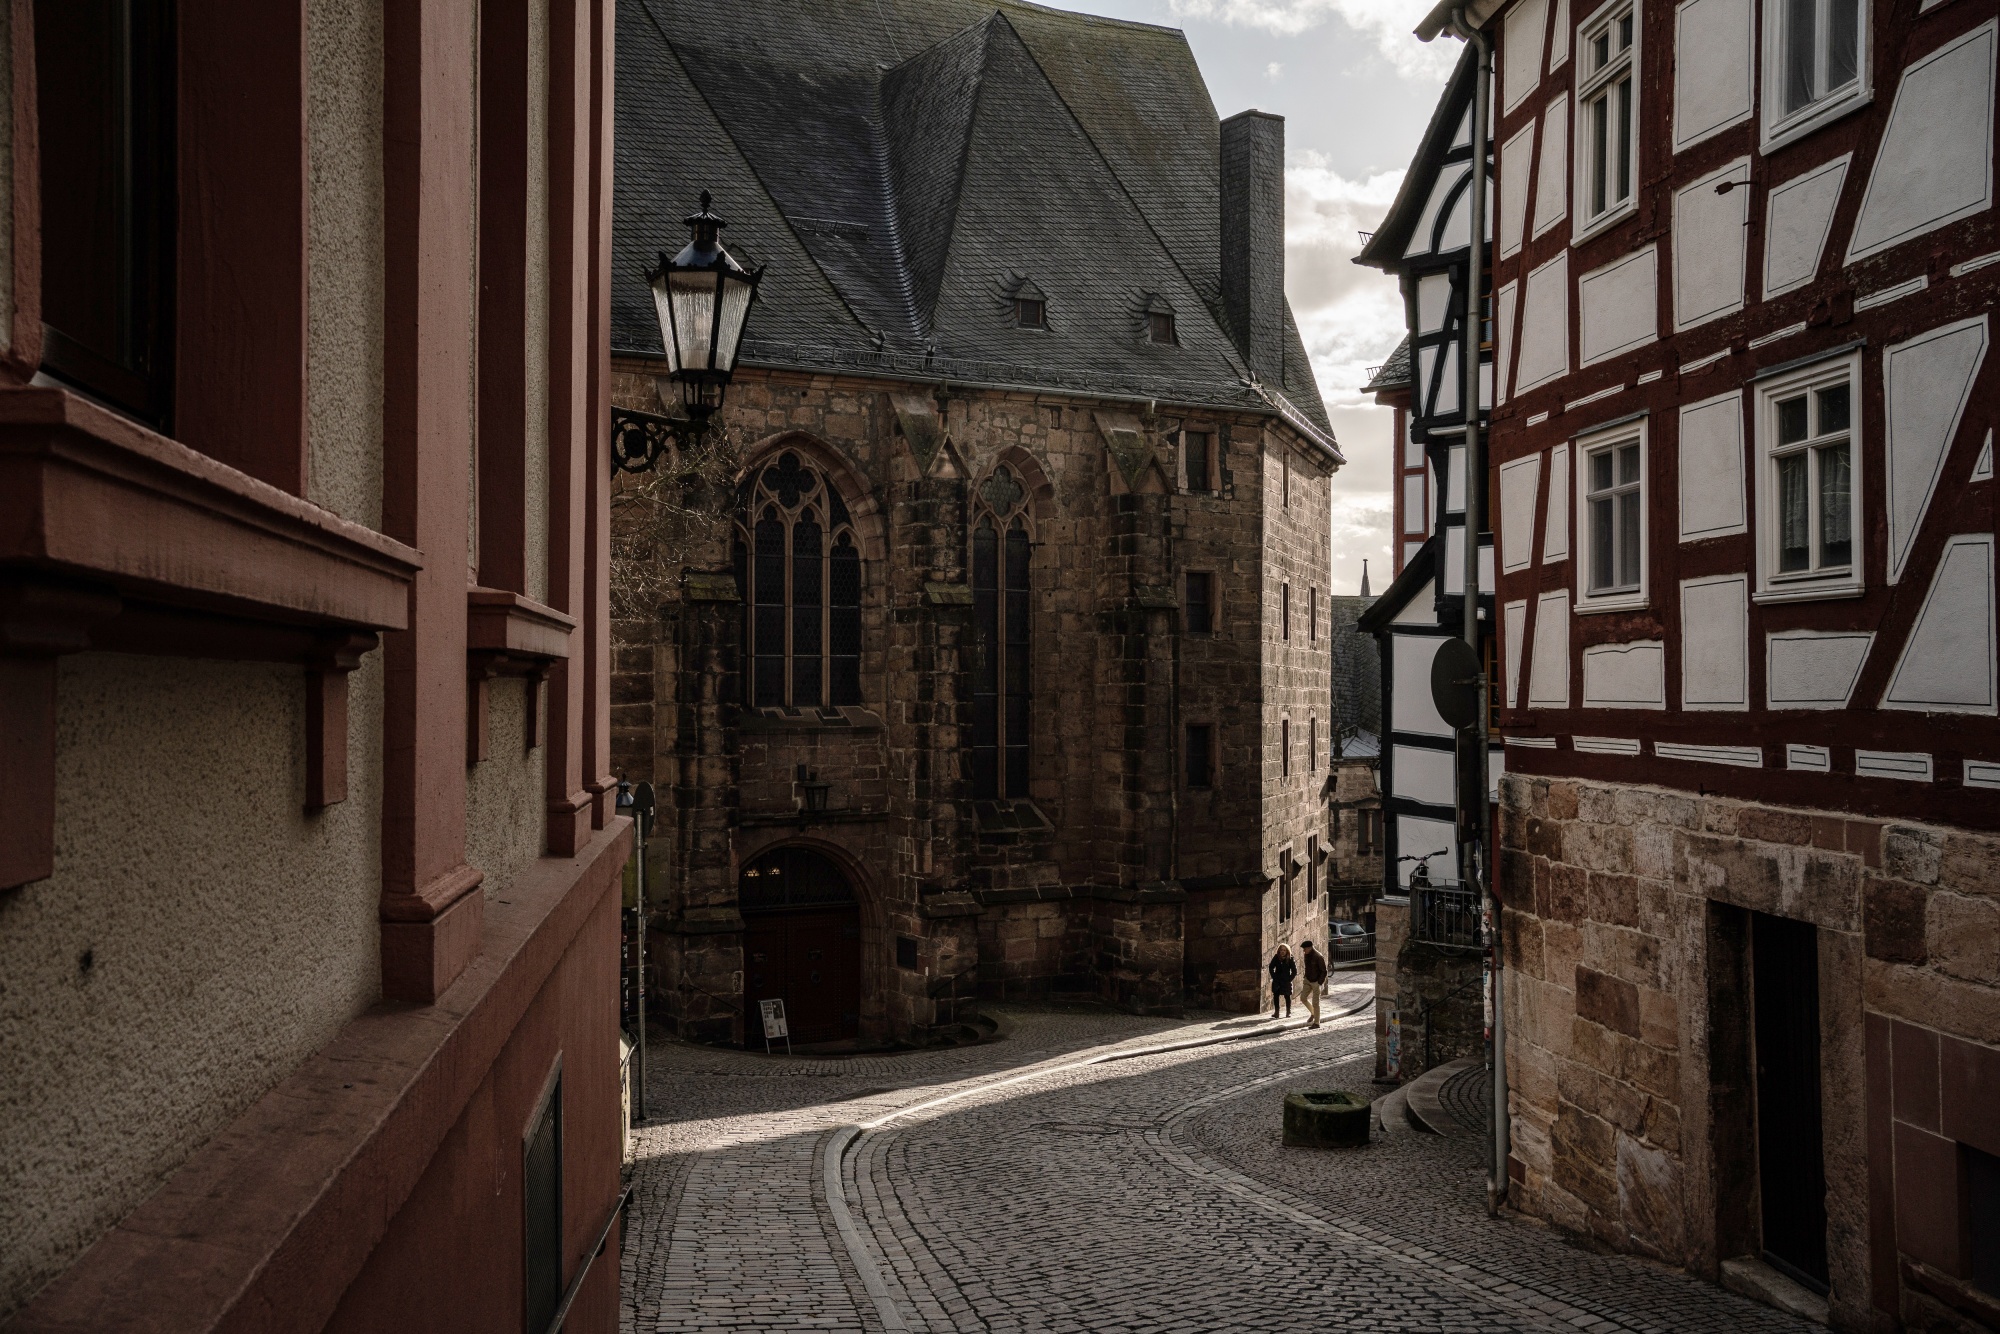 Covid Blessed Germanys Marburg With Unexpected Riches and Political Strife  - Bloomberg